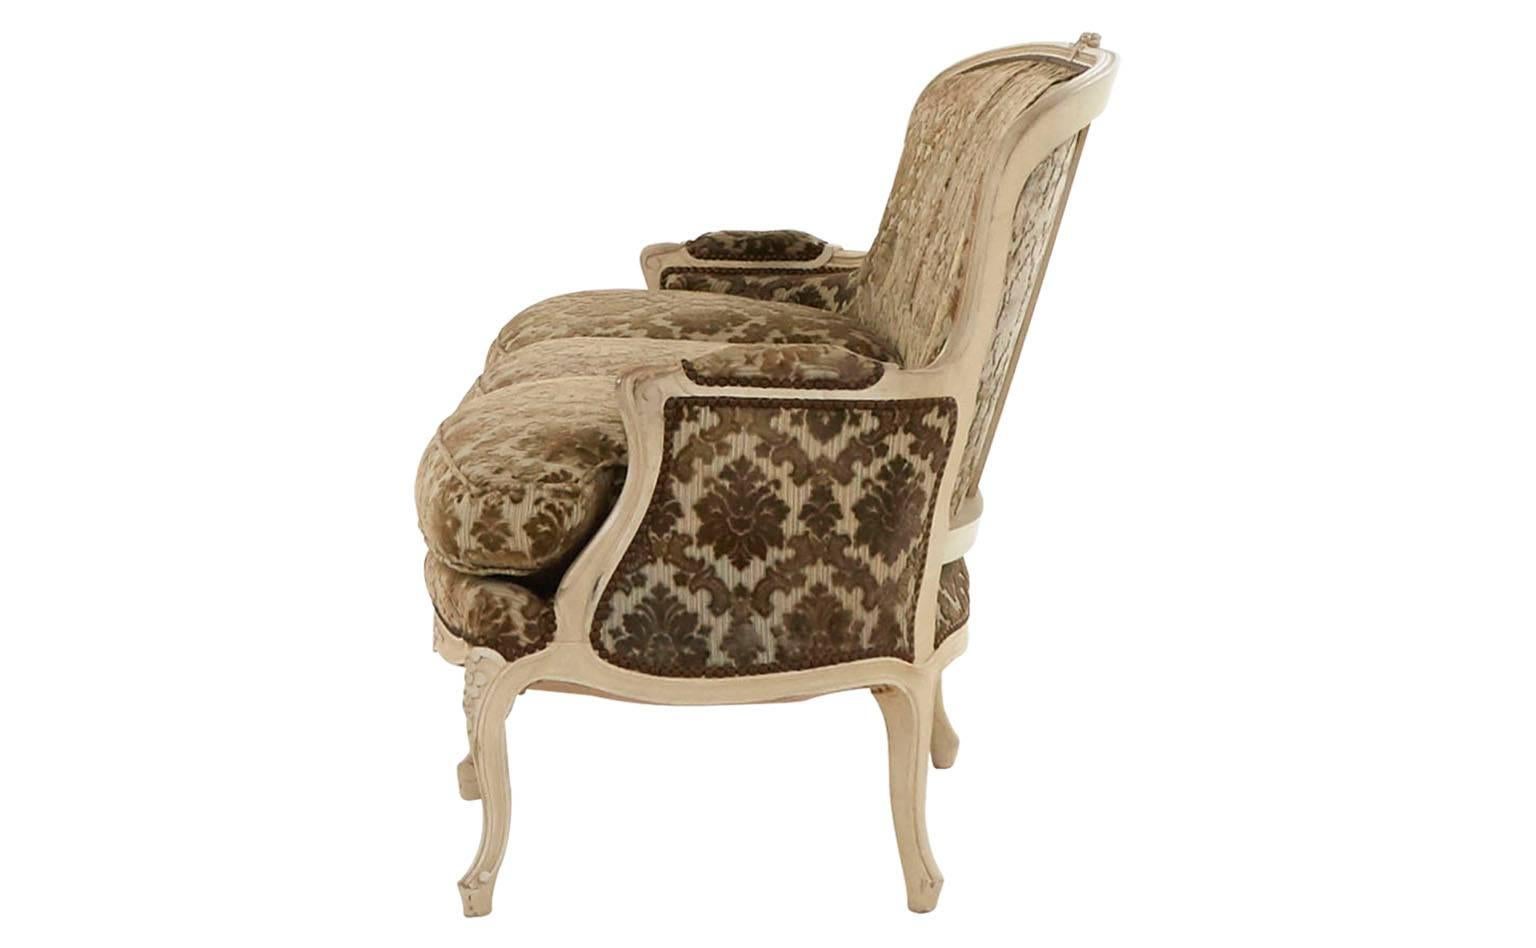 Original cut velvet upholstery.
Hand-carved Louis XV style wood frame.
Ivory laquer.
Antiqued nailhead,
20th century,
France.

Dimensions:
Overall: 70.5" W x 30" D x 35.5" H, 
seat height 18" H,
arm height 30.5"H.